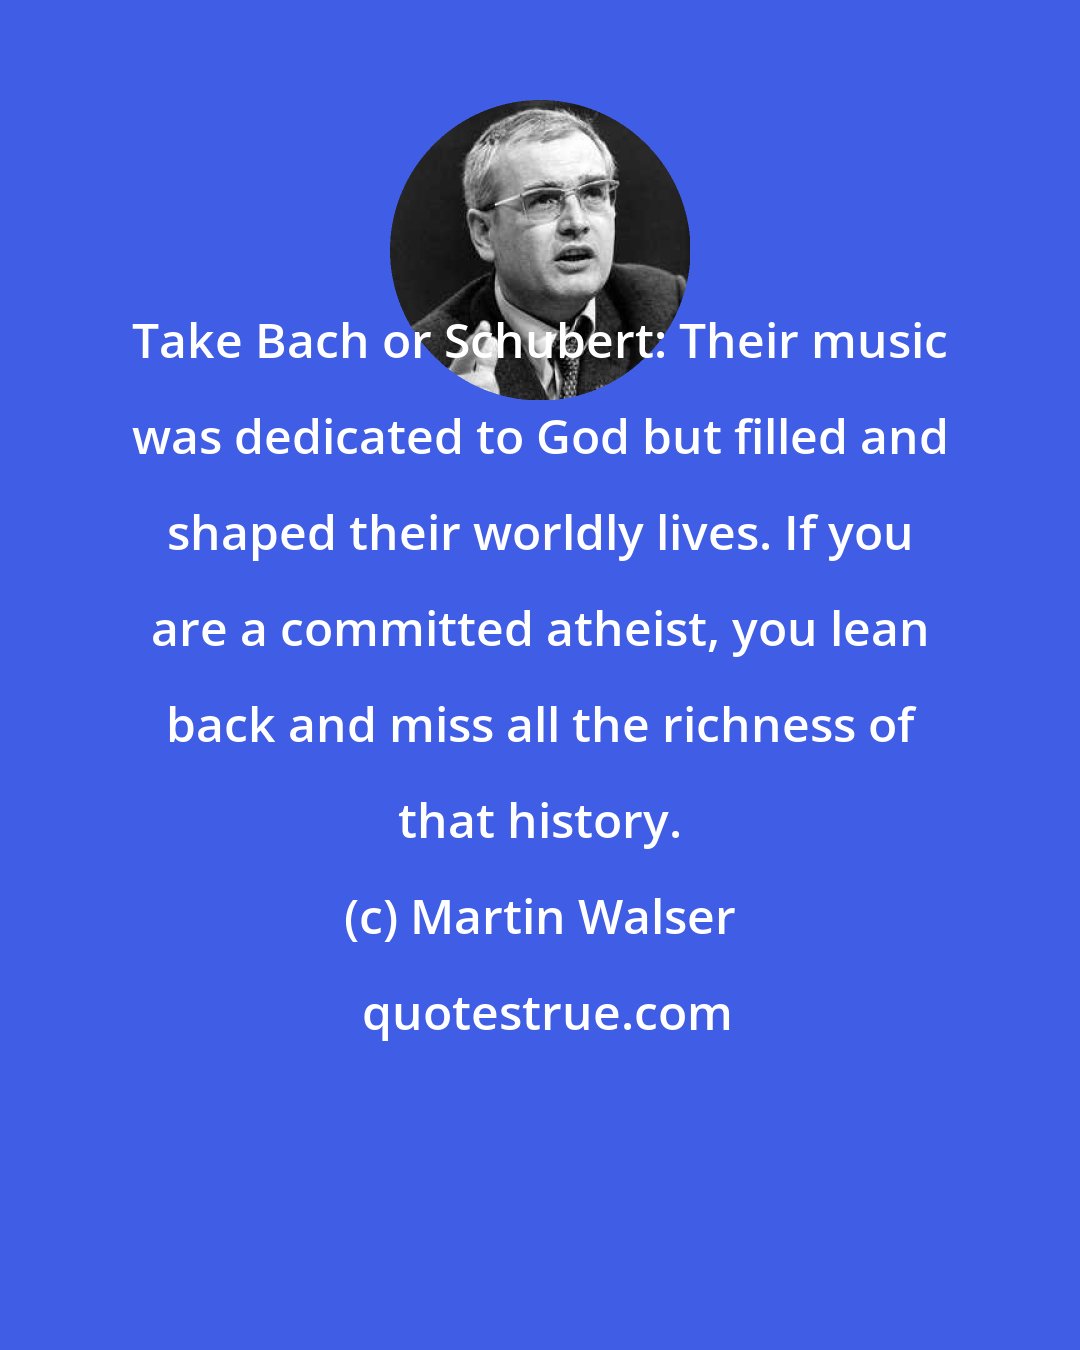 Martin Walser: Take Bach or Schubert: Their music was dedicated to God but filled and shaped their worldly lives. If you are a committed atheist, you lean back and miss all the richness of that history.